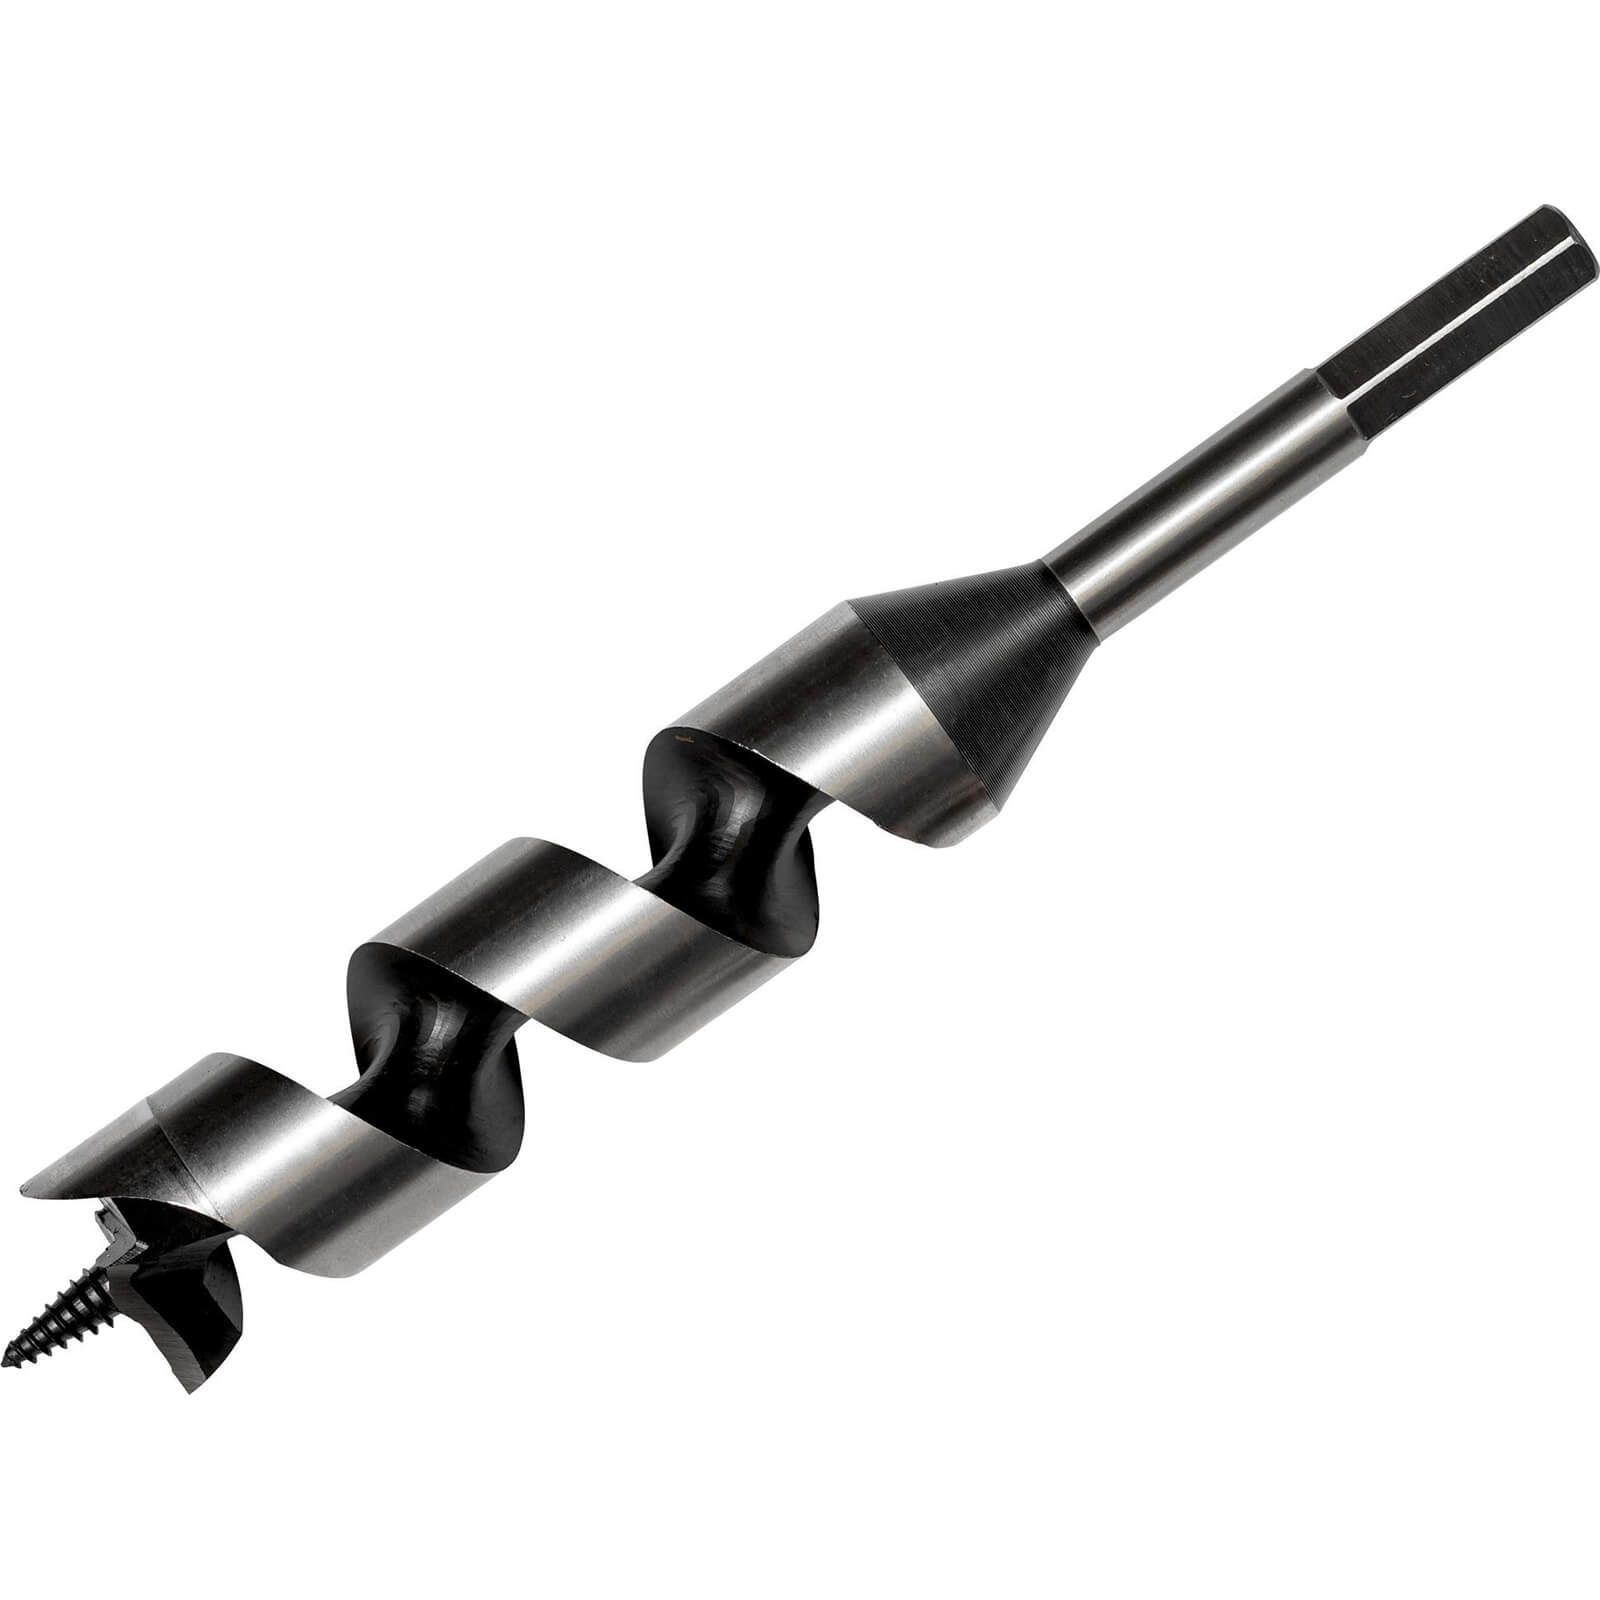 Image of Bahco 9626 Series Combination Auger Drill Bit 16mm 230mm